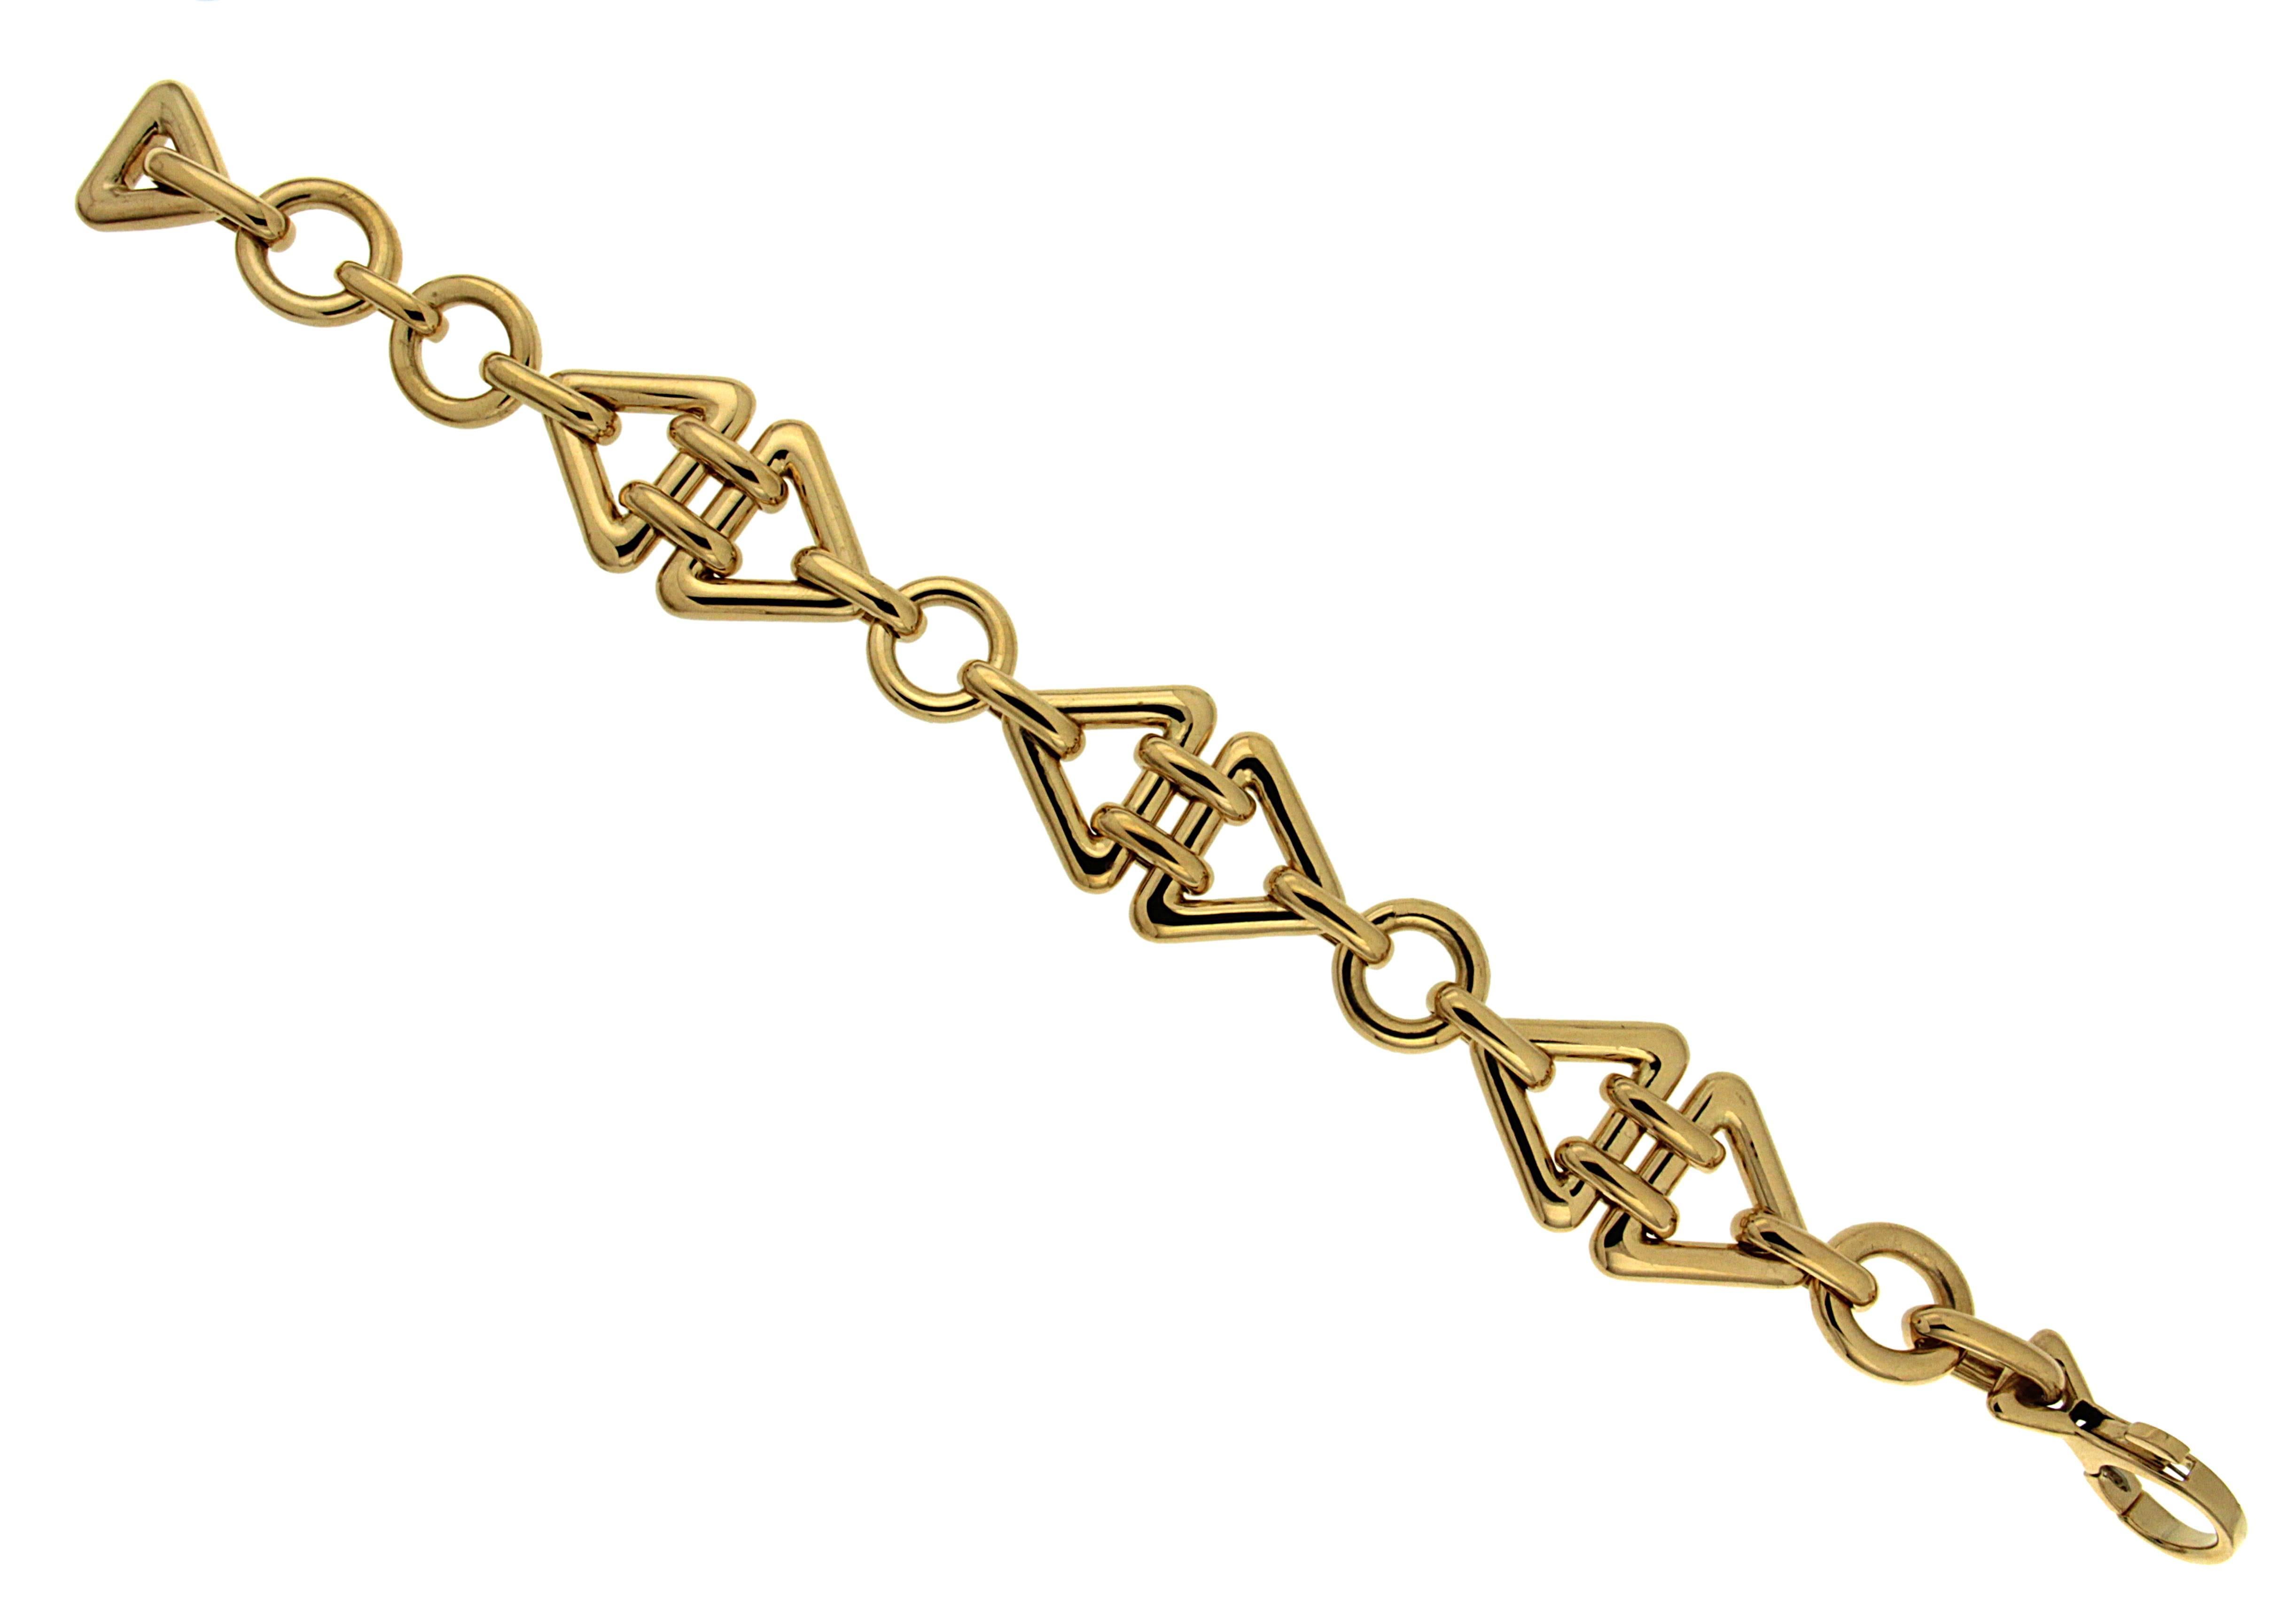 For decades, Valentin Magro's fine jewelry creations have illuminated the most special of occasions. This geometric bracelet features double oval links connects two triangle shape links with round links in between. The bracelet is completed in 18kt